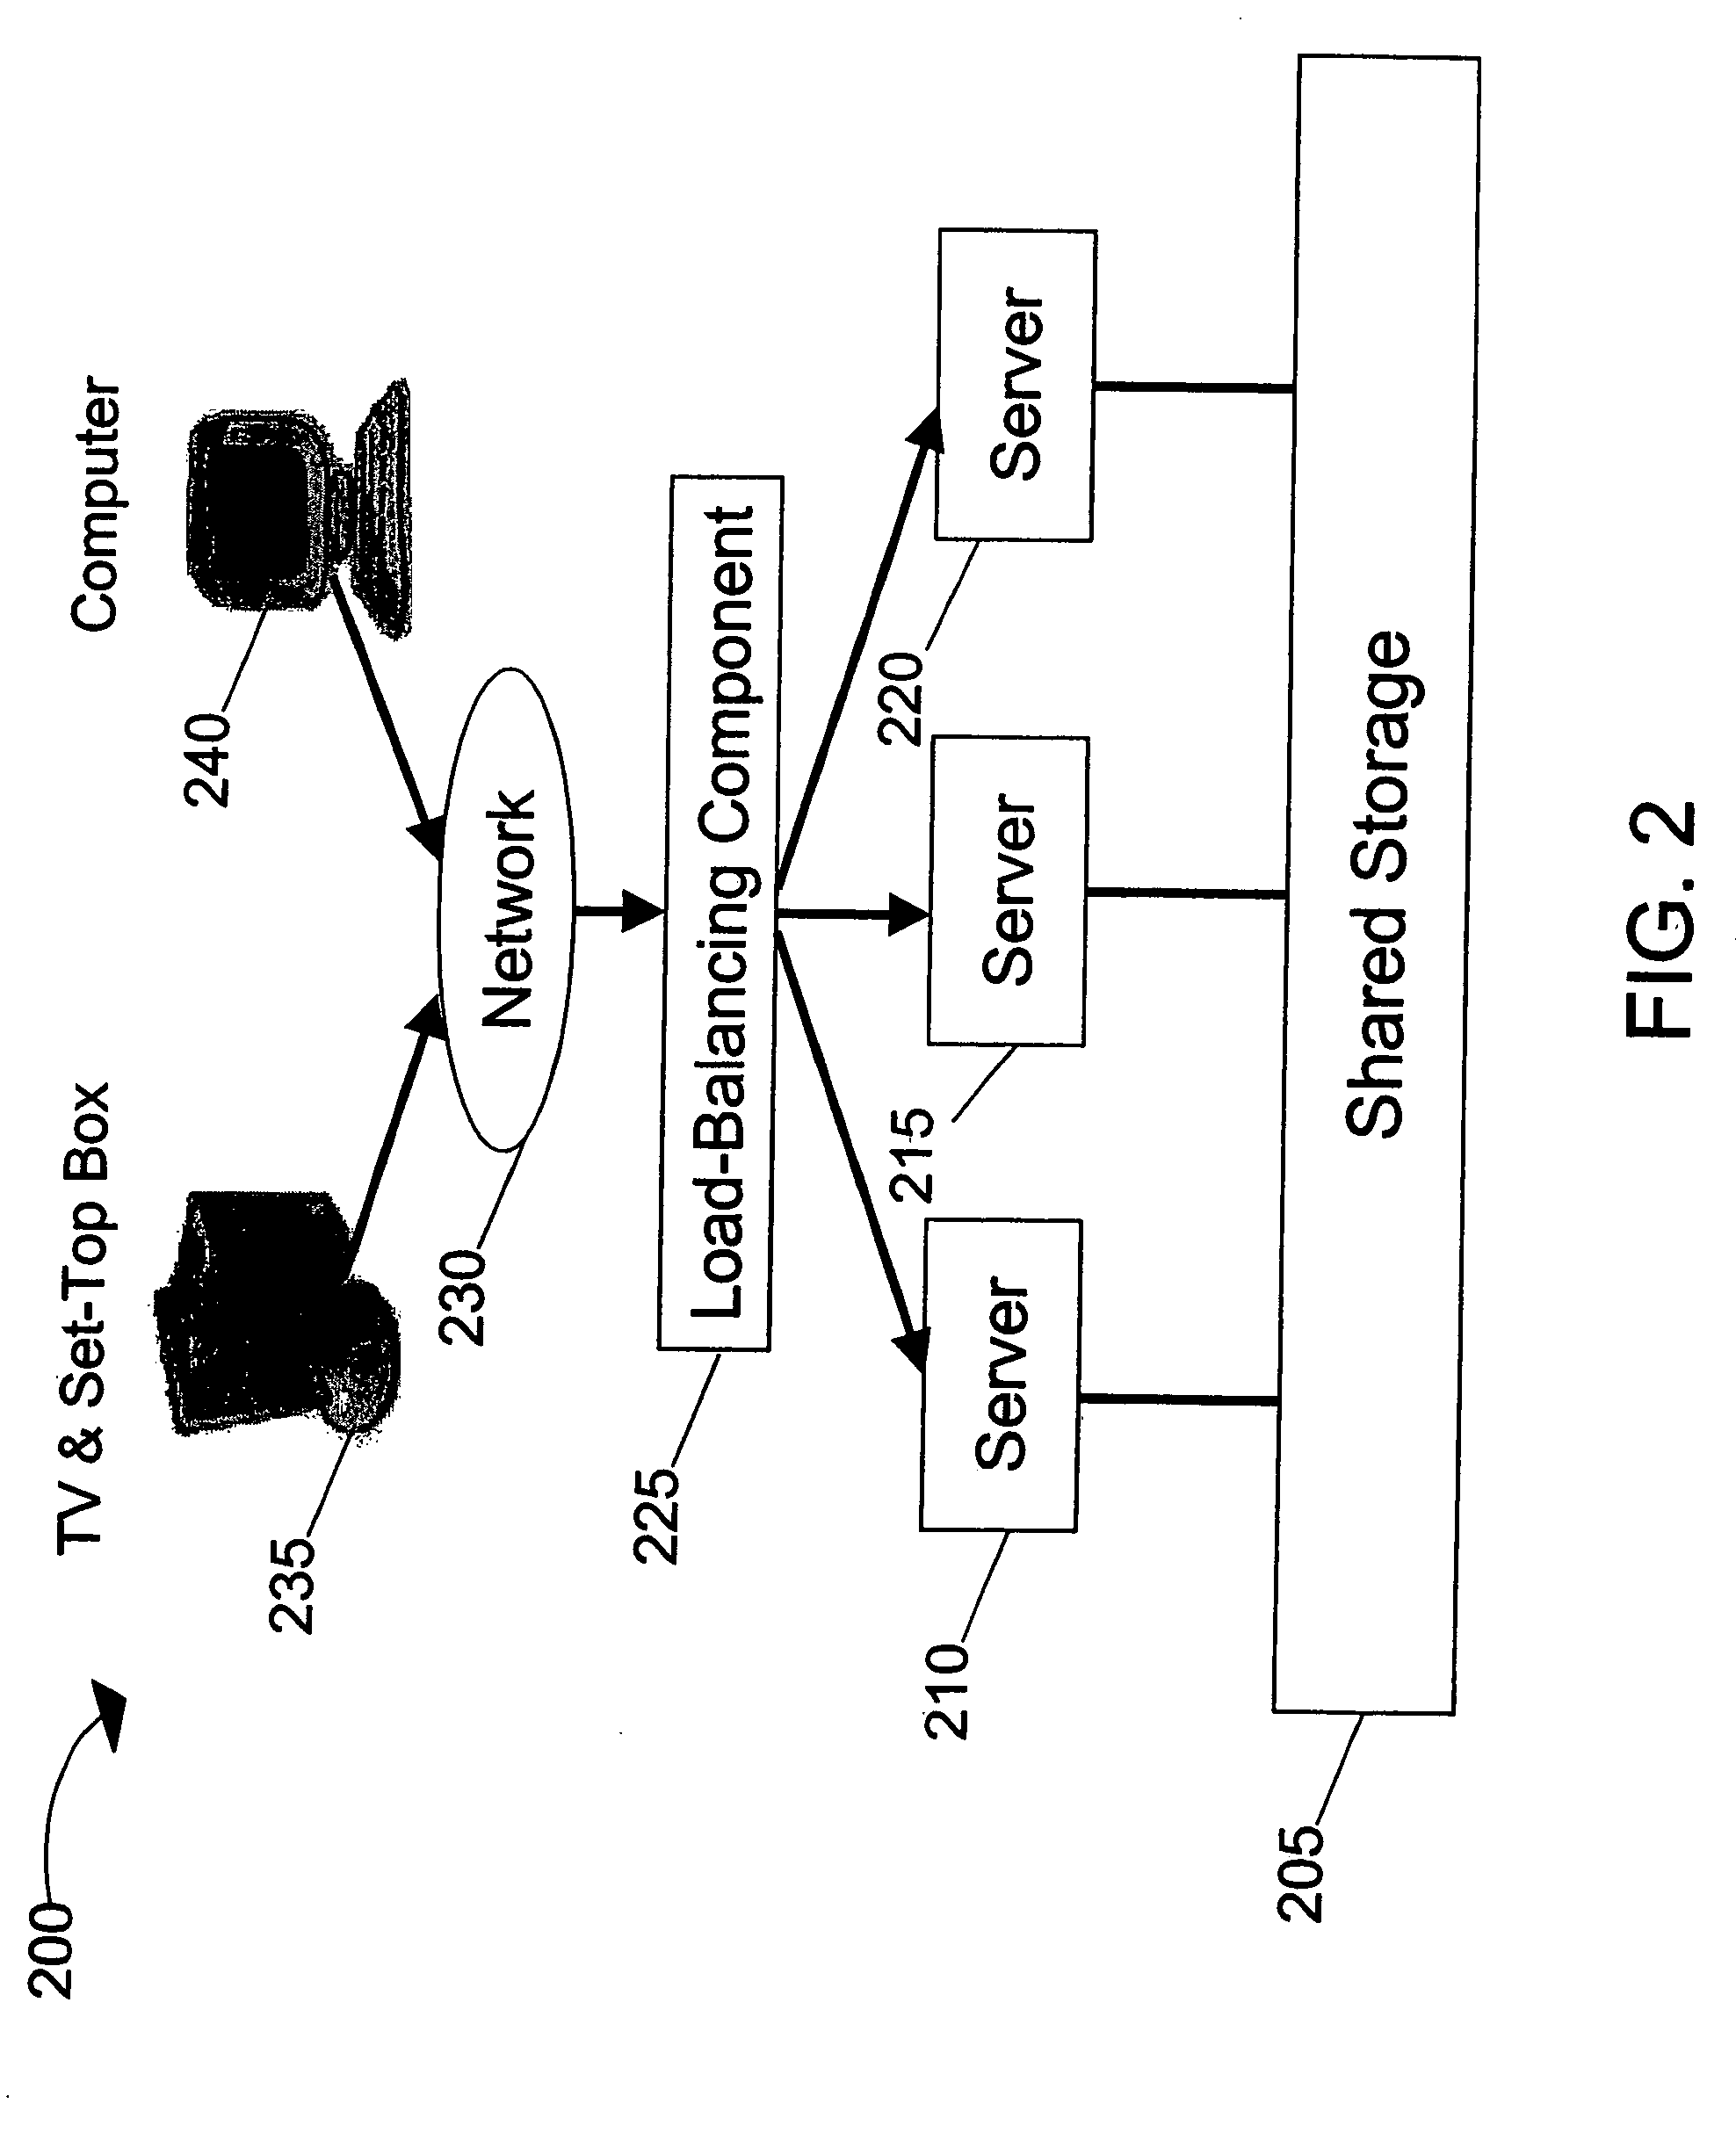 Systems and methods for load balancing storage and streaming media requests in a scalable, cluster-based architecture for real-time streaming